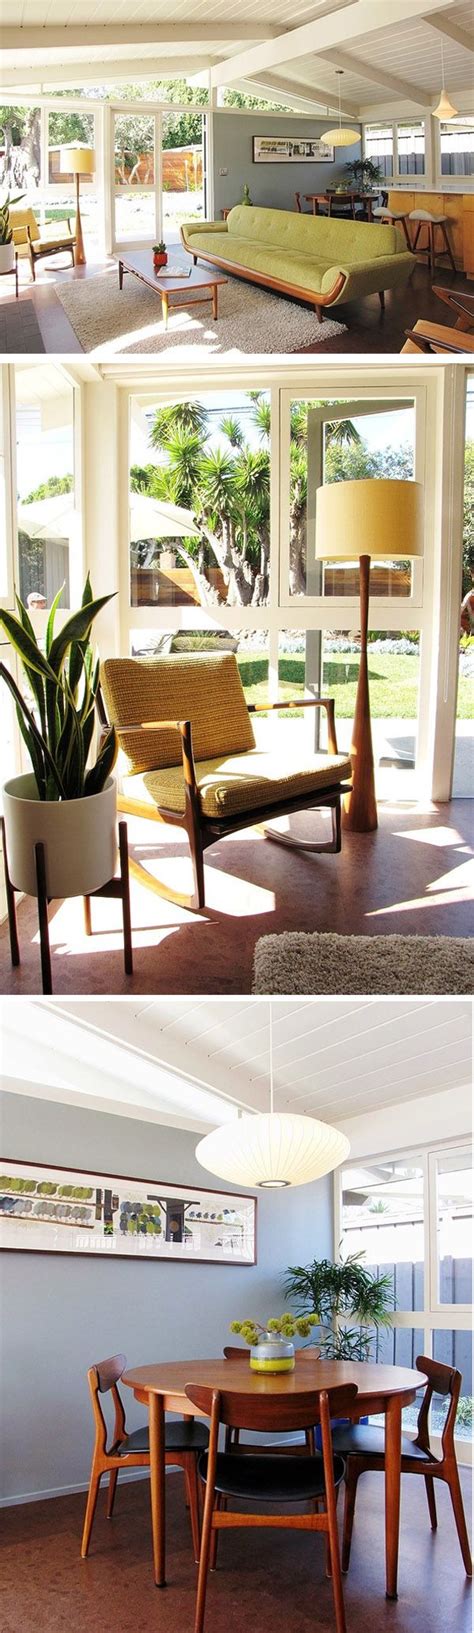 Whats My Home Decor Style Mid Century Modern